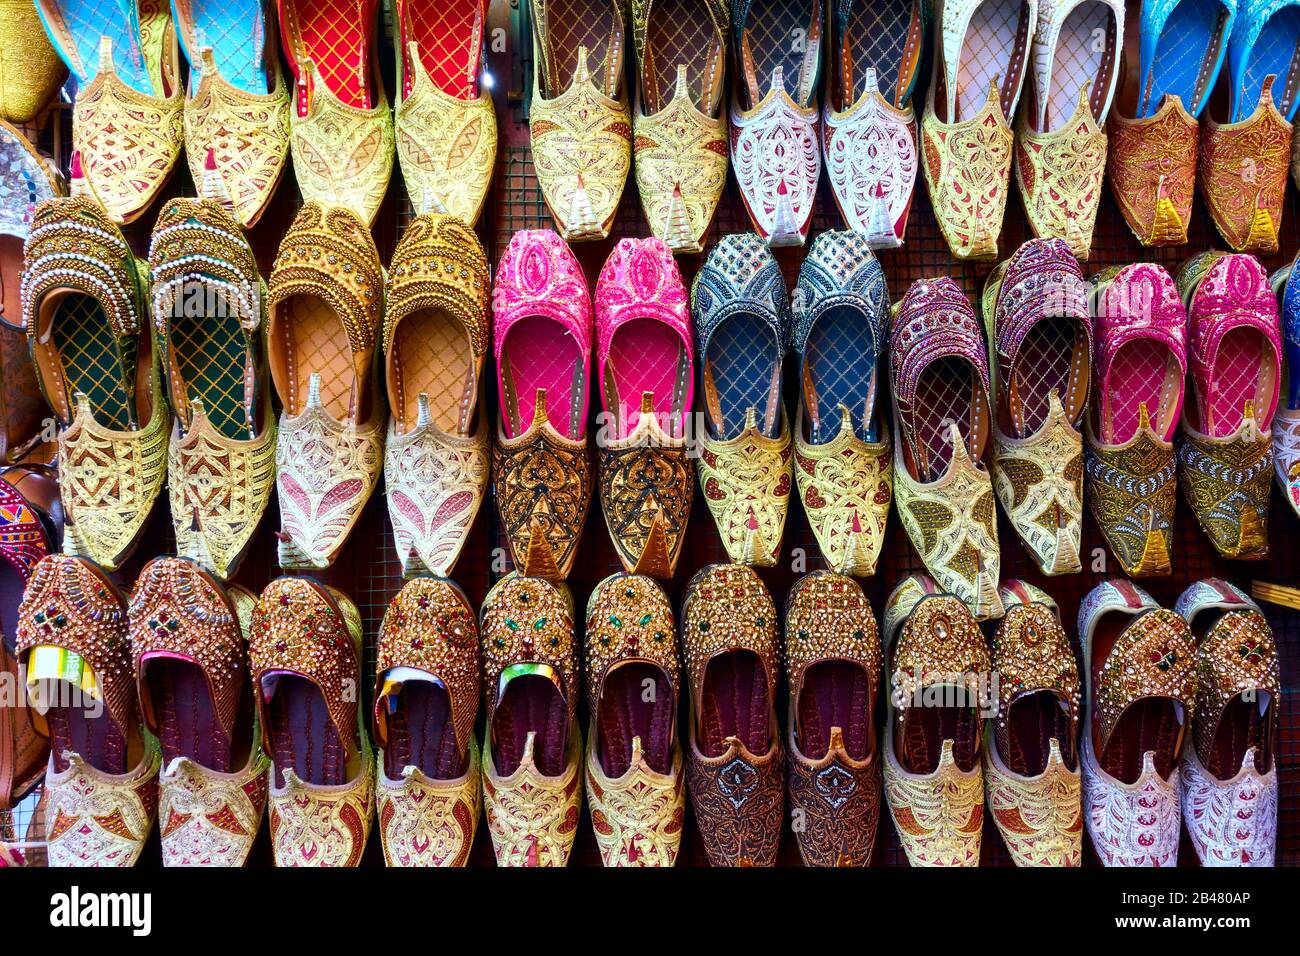 Colorful arabian babouches shoes at market stall Stock Photo